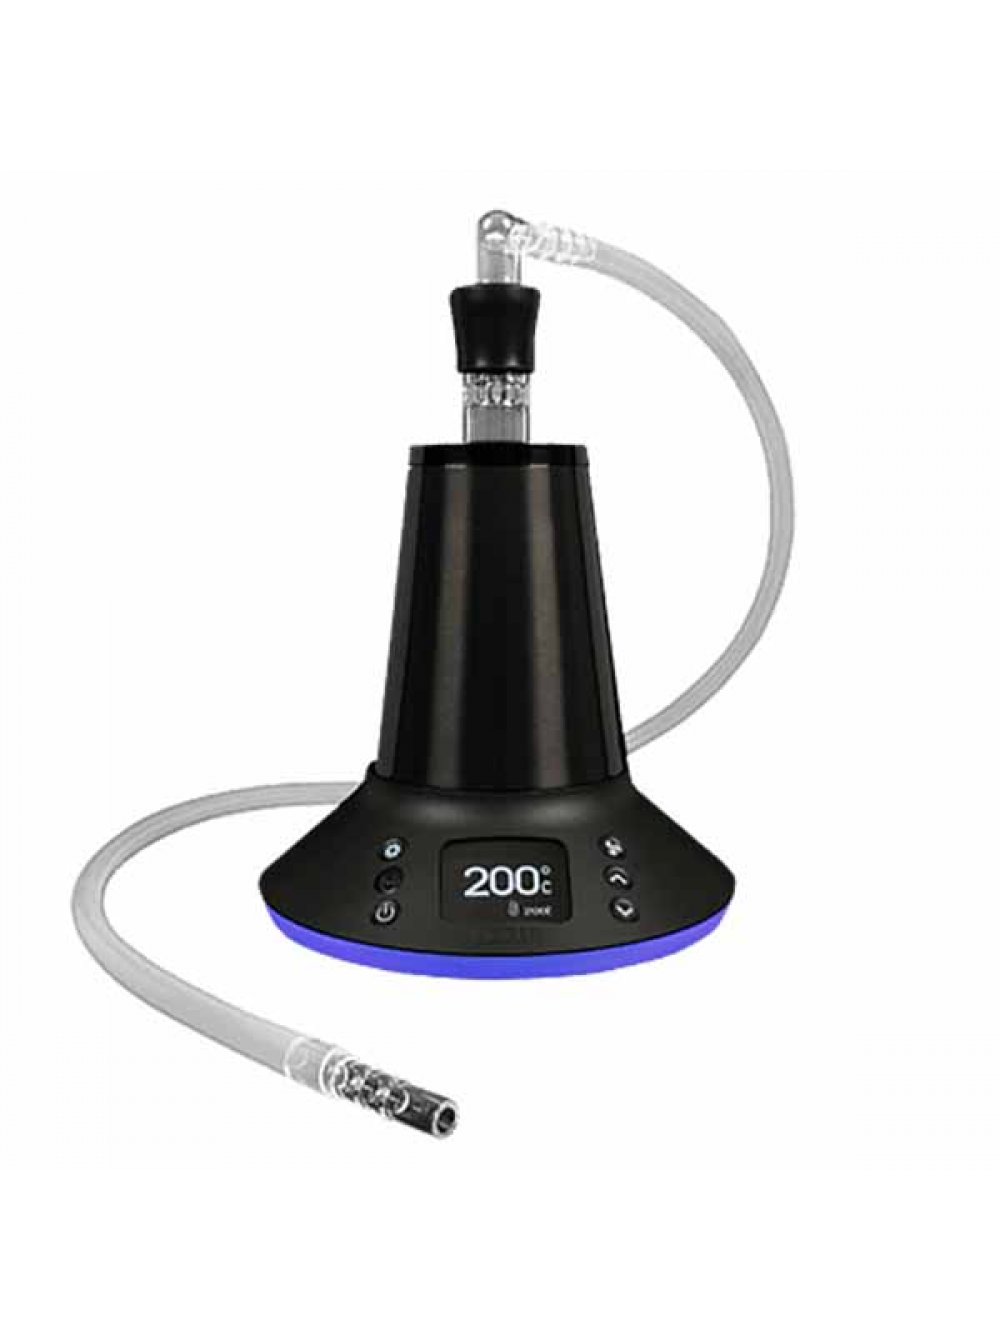 Arizer xq2 review